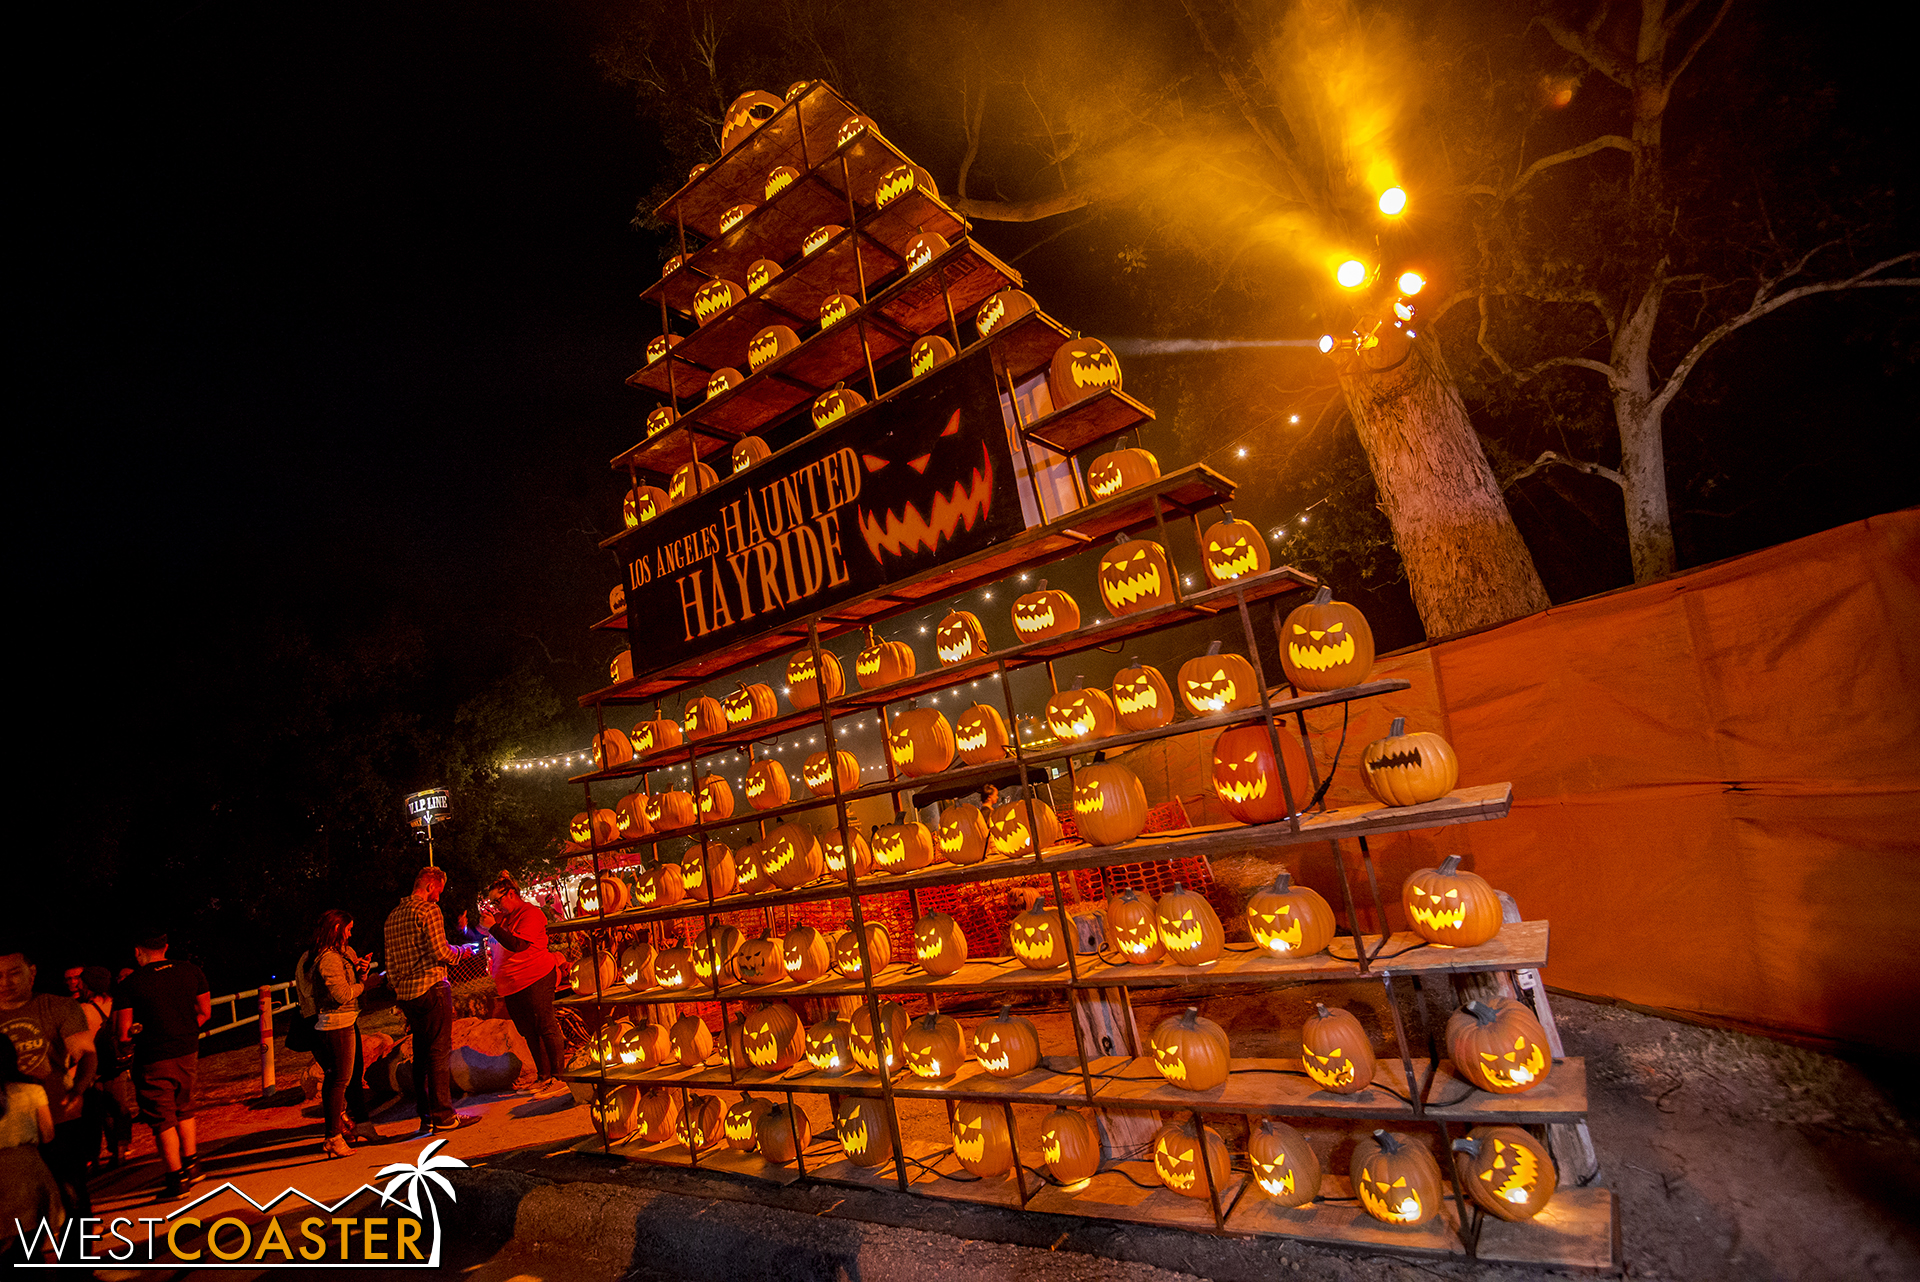  The impressive tower of jack-o-lanterns is still at the Haunted Hayride. 